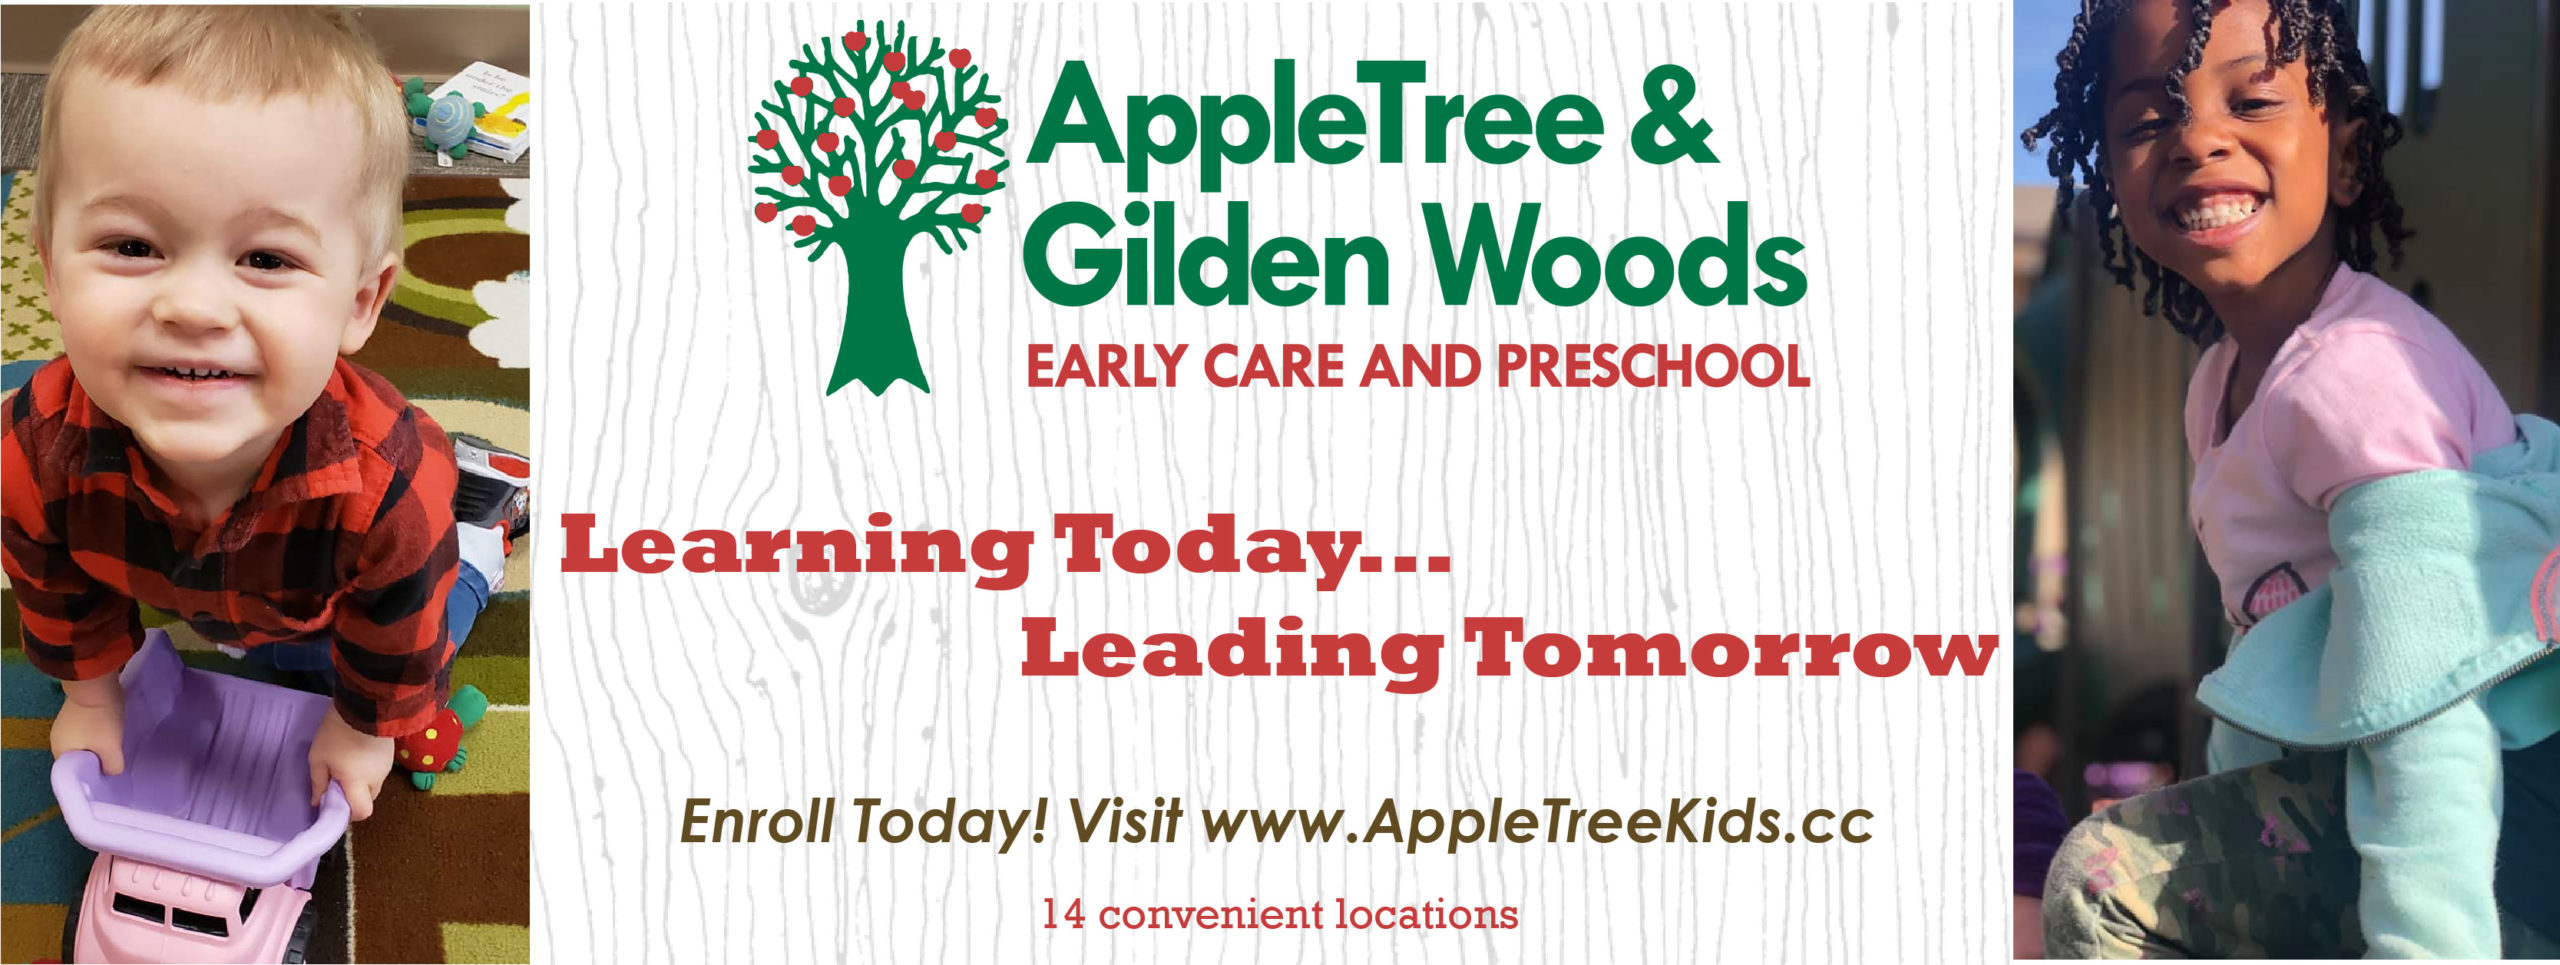 AppleTree Childcare Guide 2021 scaled